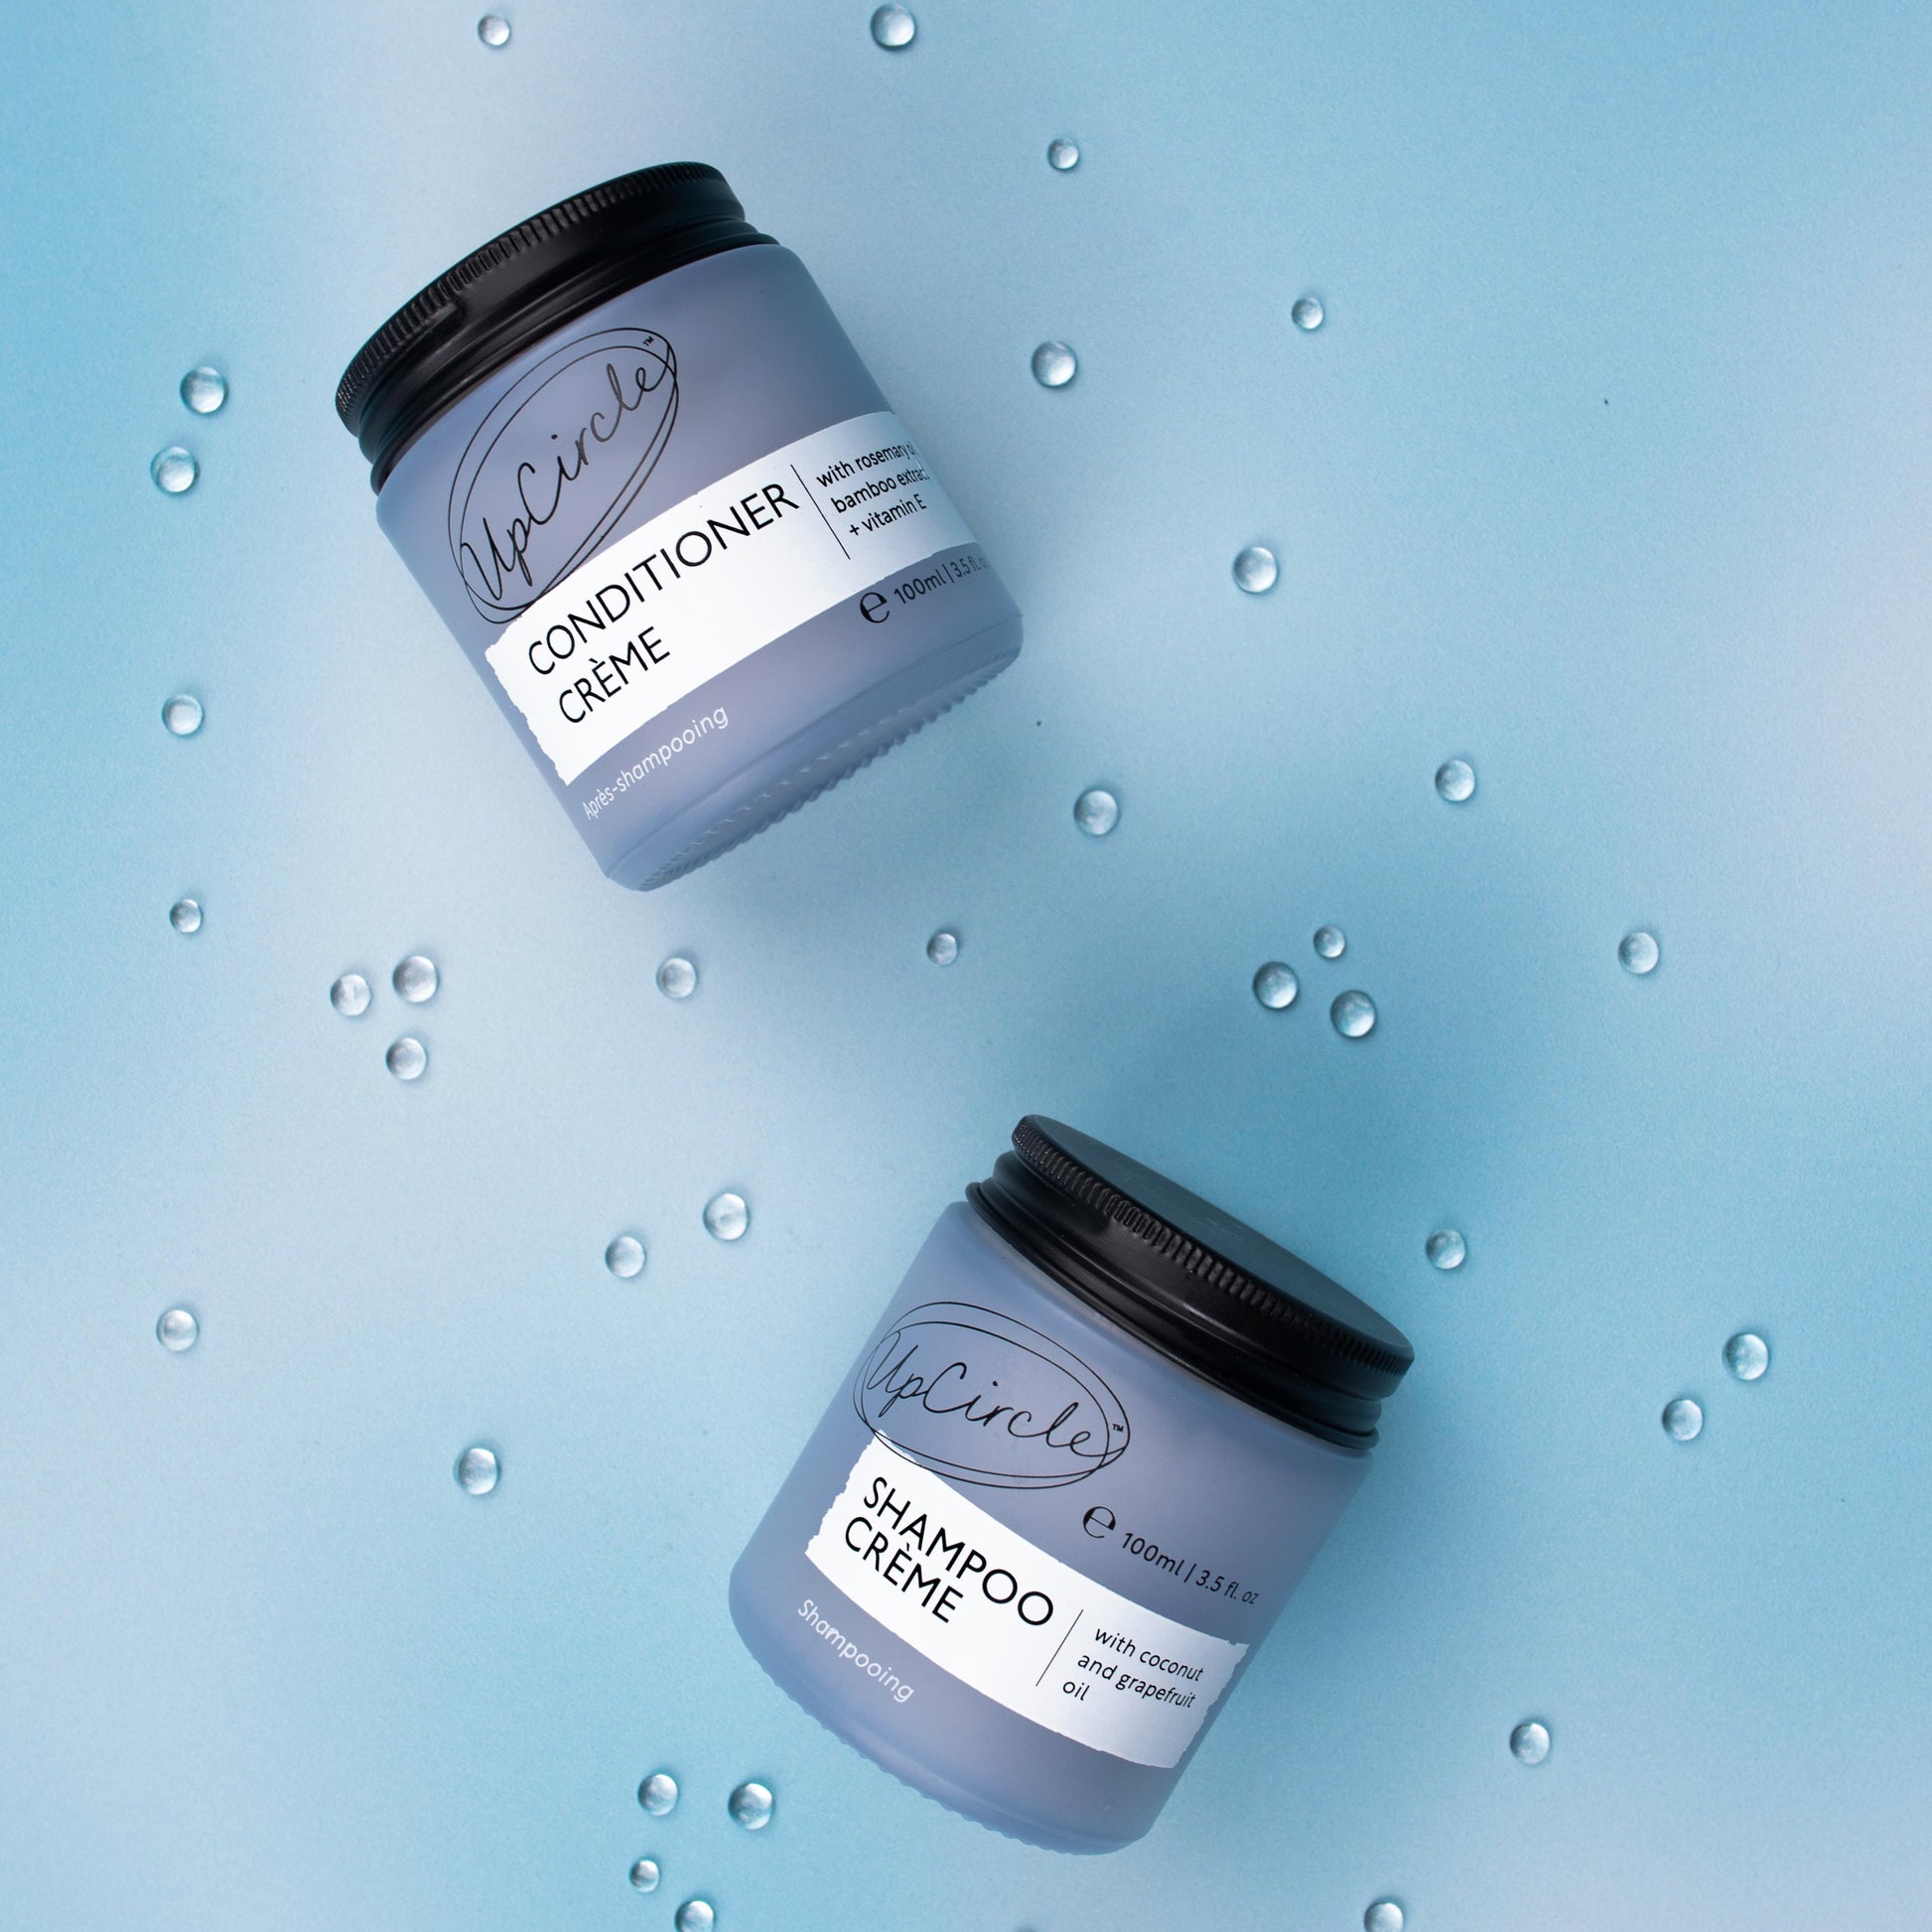 flatlay photo of upcircle's shampoo creme and conditioner creme on a blue iridescent background. both products are in light blue glass jars with black aluminium lids. there are clear water droplets in the background